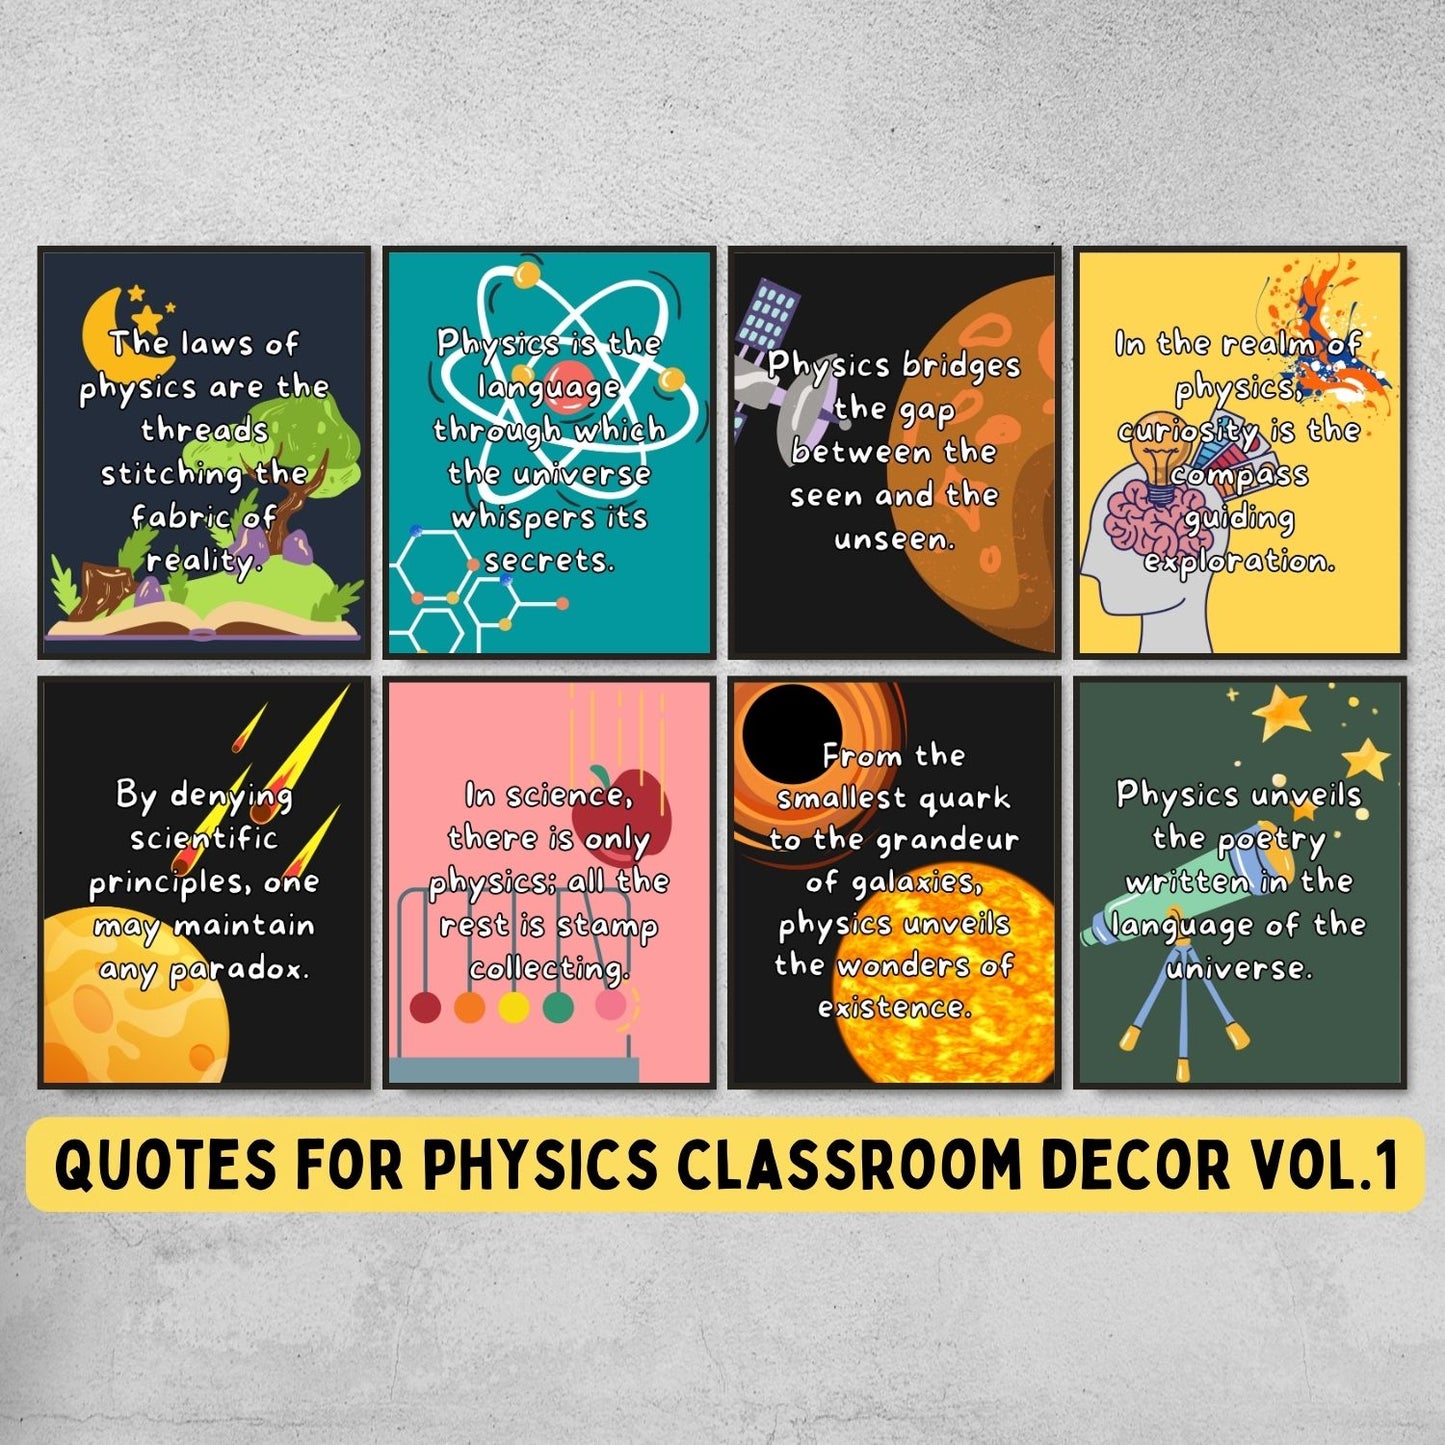 Quotes for Physics classroom decoration - Vol.1